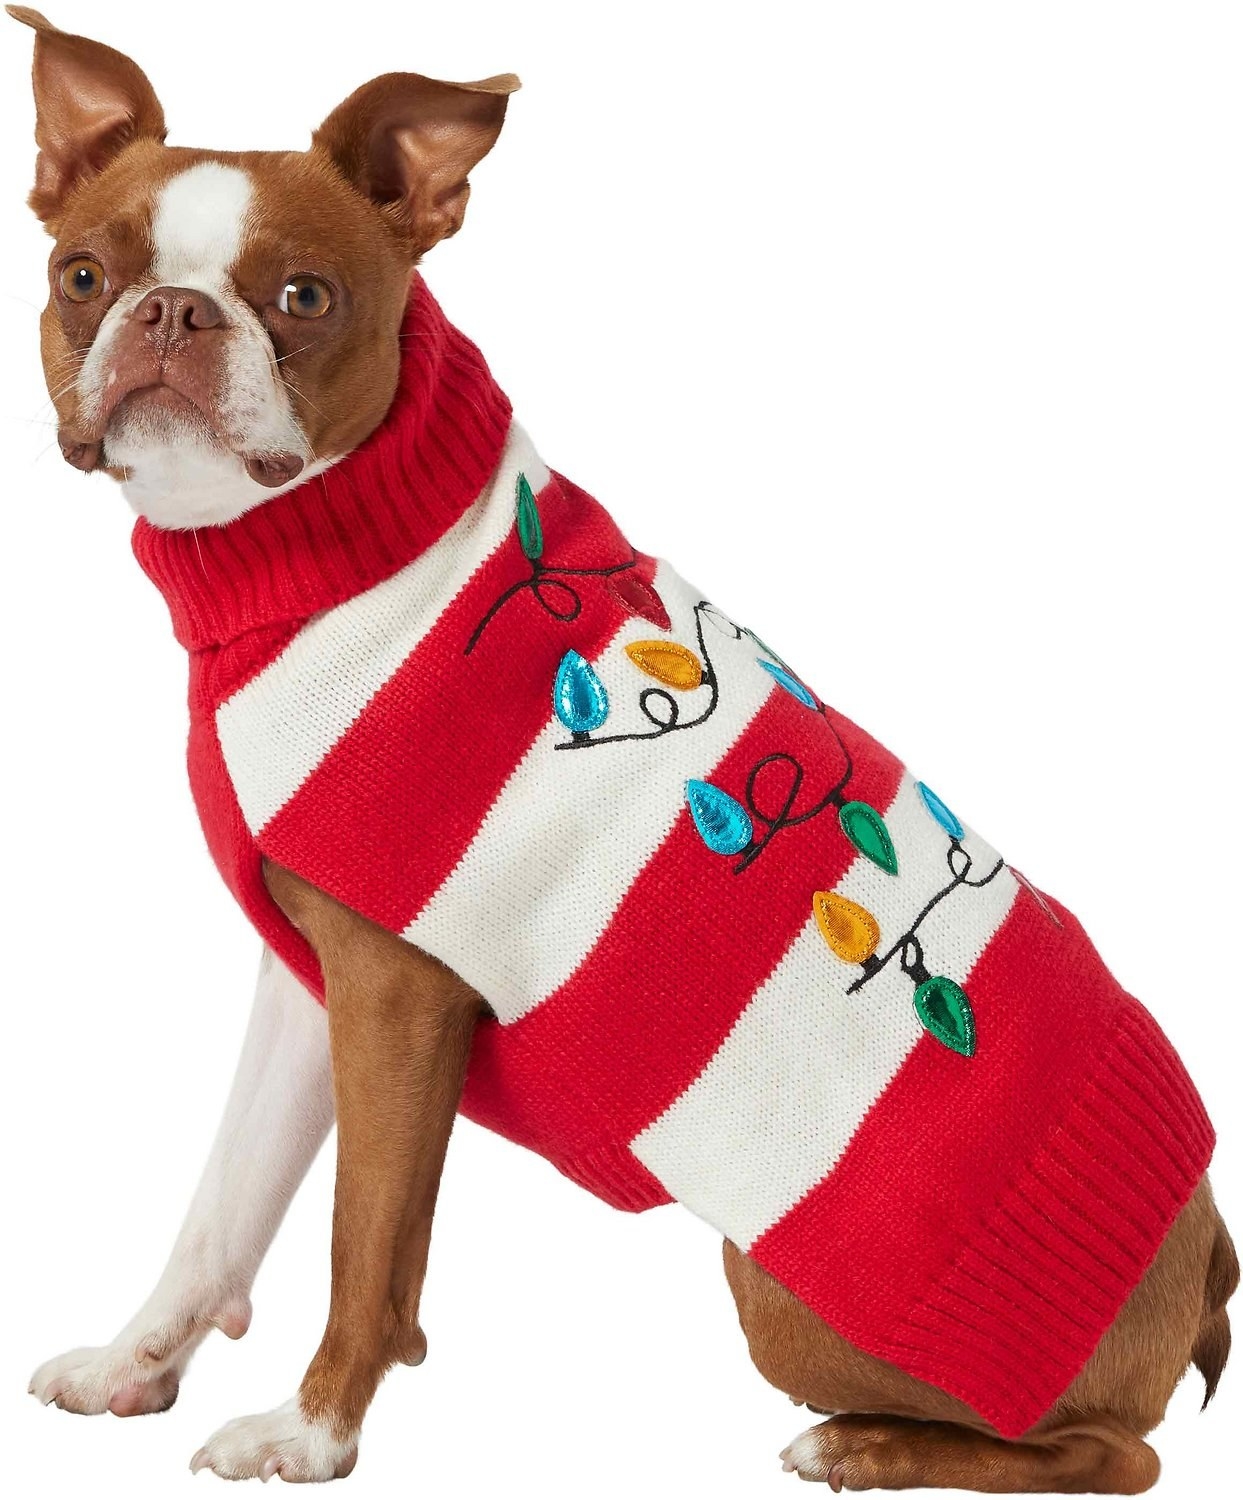 A dog wearing a red and white striped sweater with string light accents.